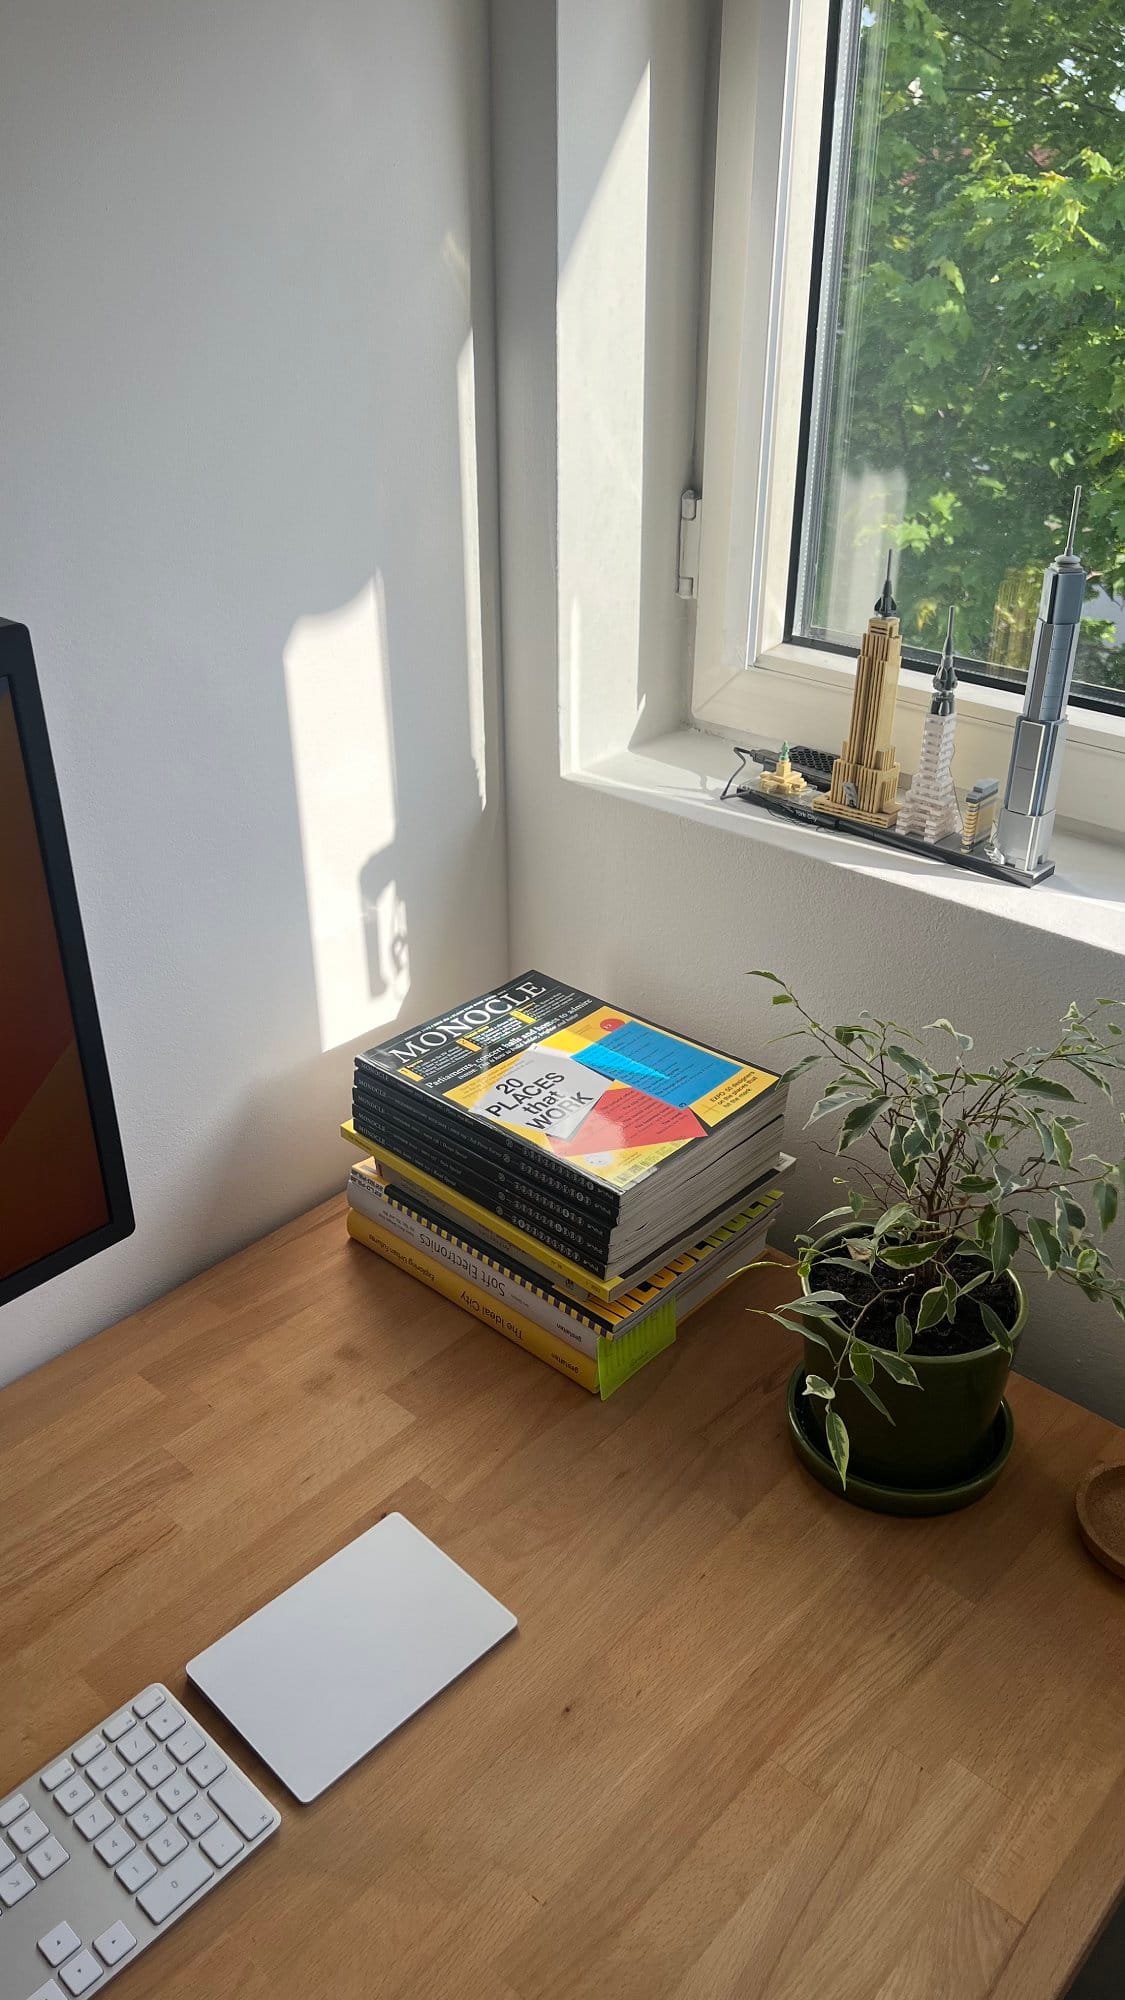 A close-up of a home office desk featuring a stack of books and magazines, a small potted plant, and a LEGO model of famous buildings on the windowsill, all arranged on an IKEA GERTON tabletop